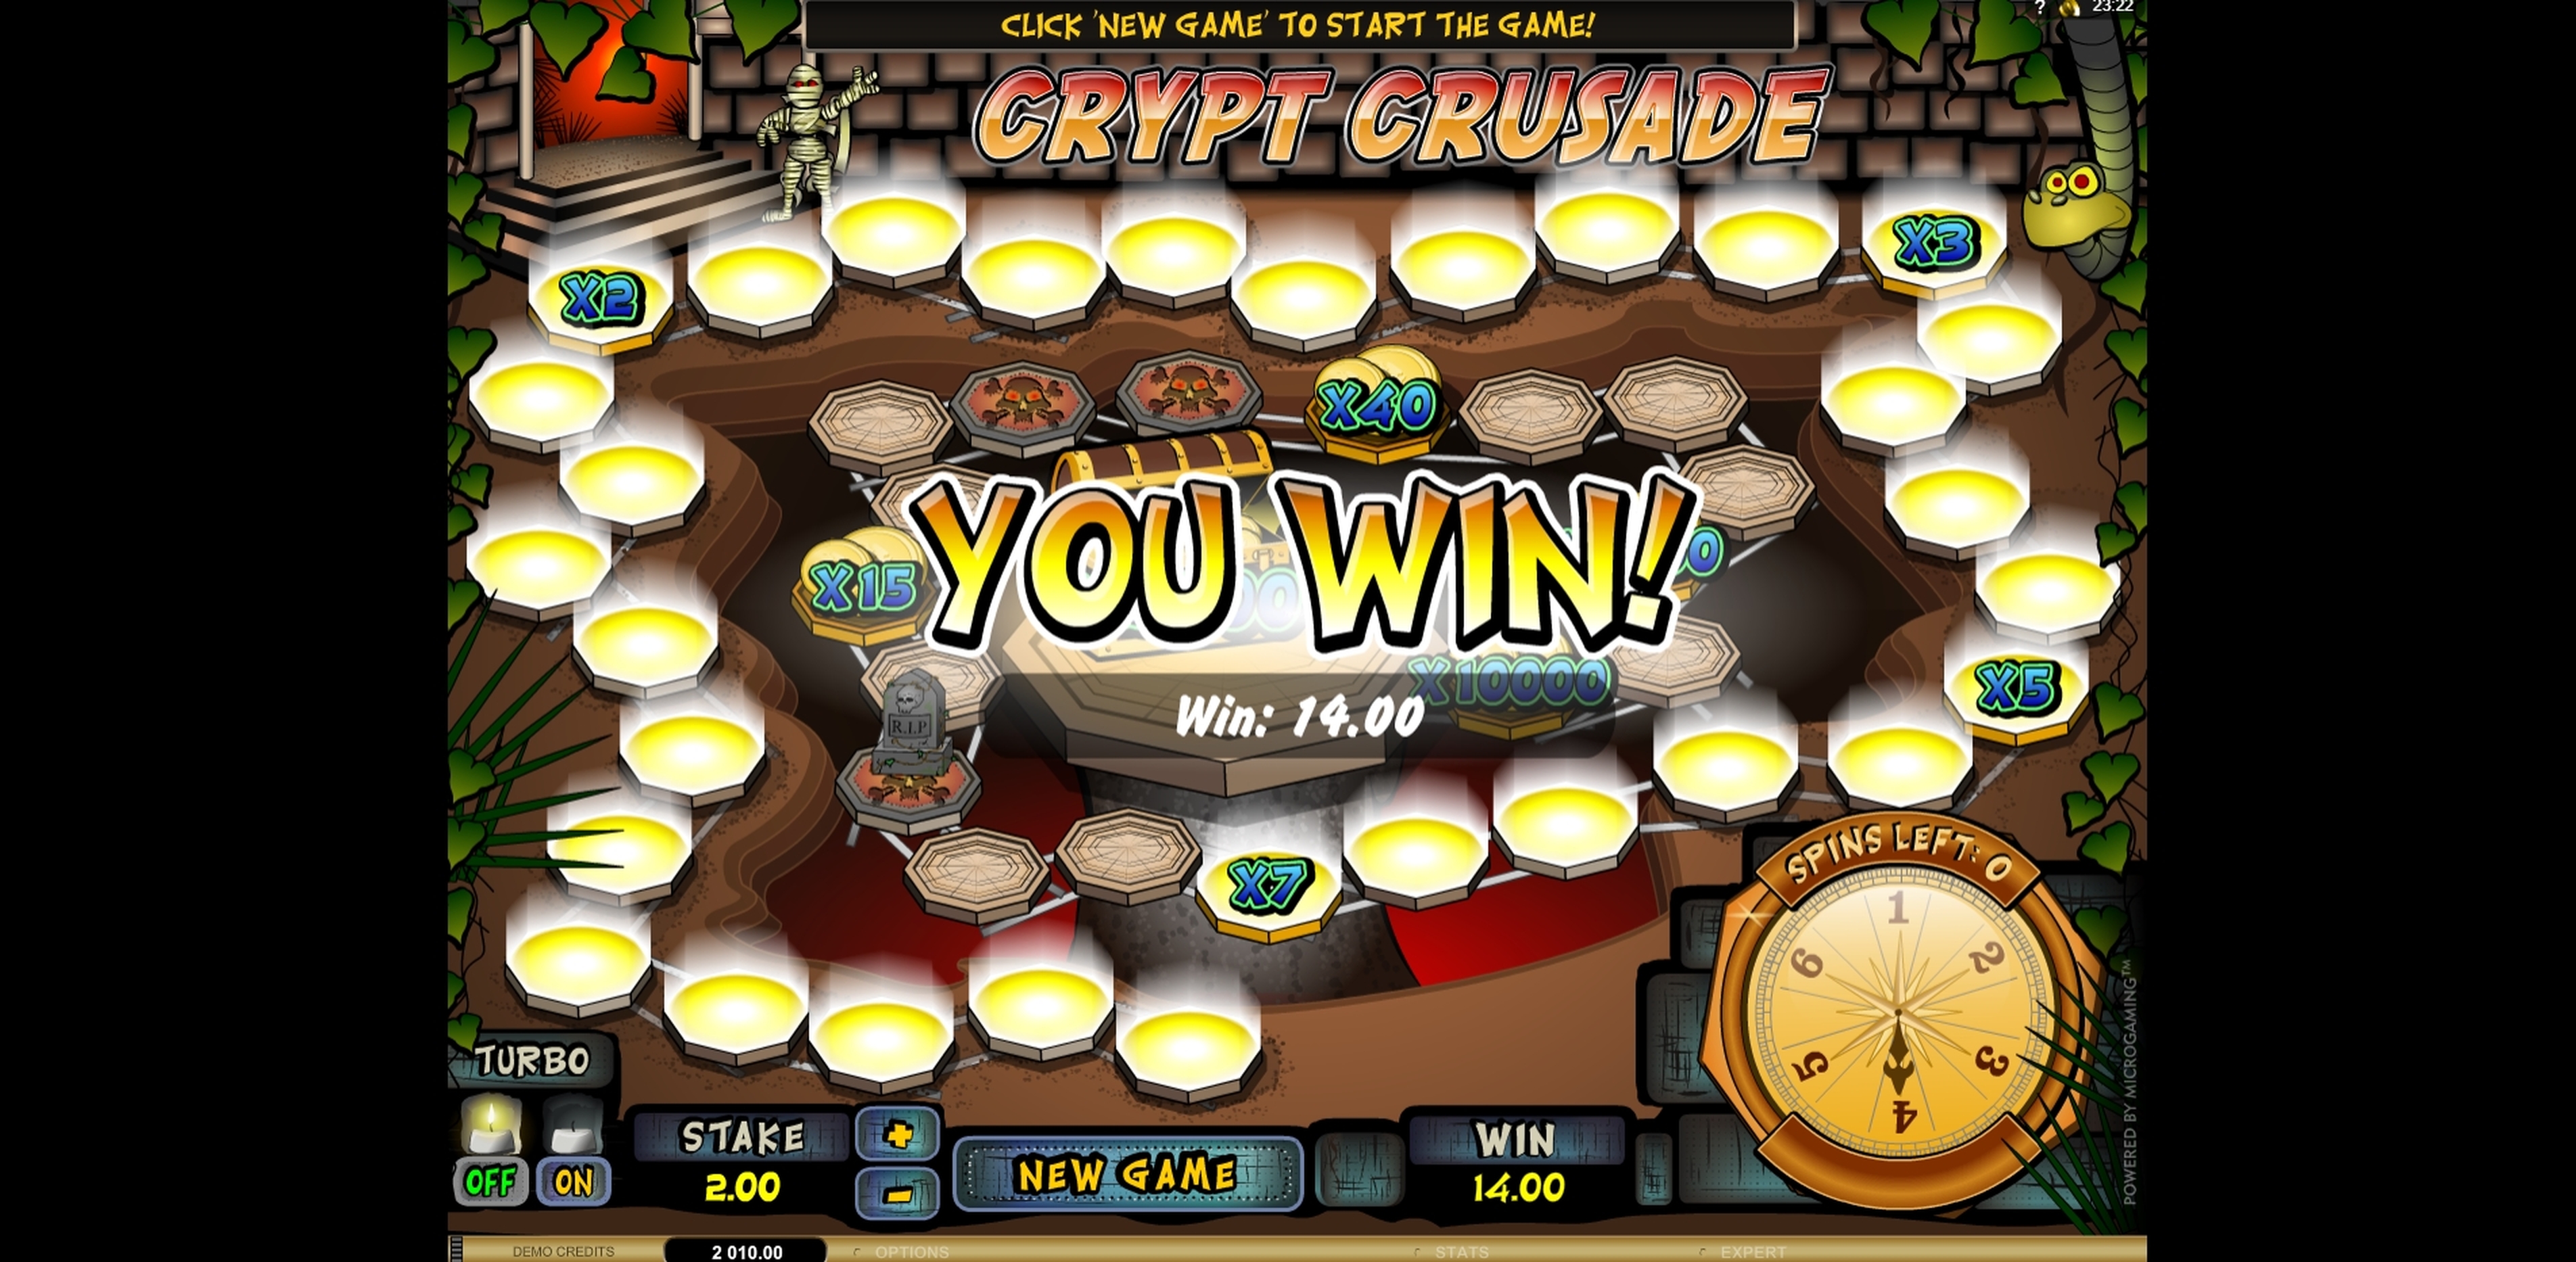 Win Money in Crypt Crusade Free Slot Game by Microgaming